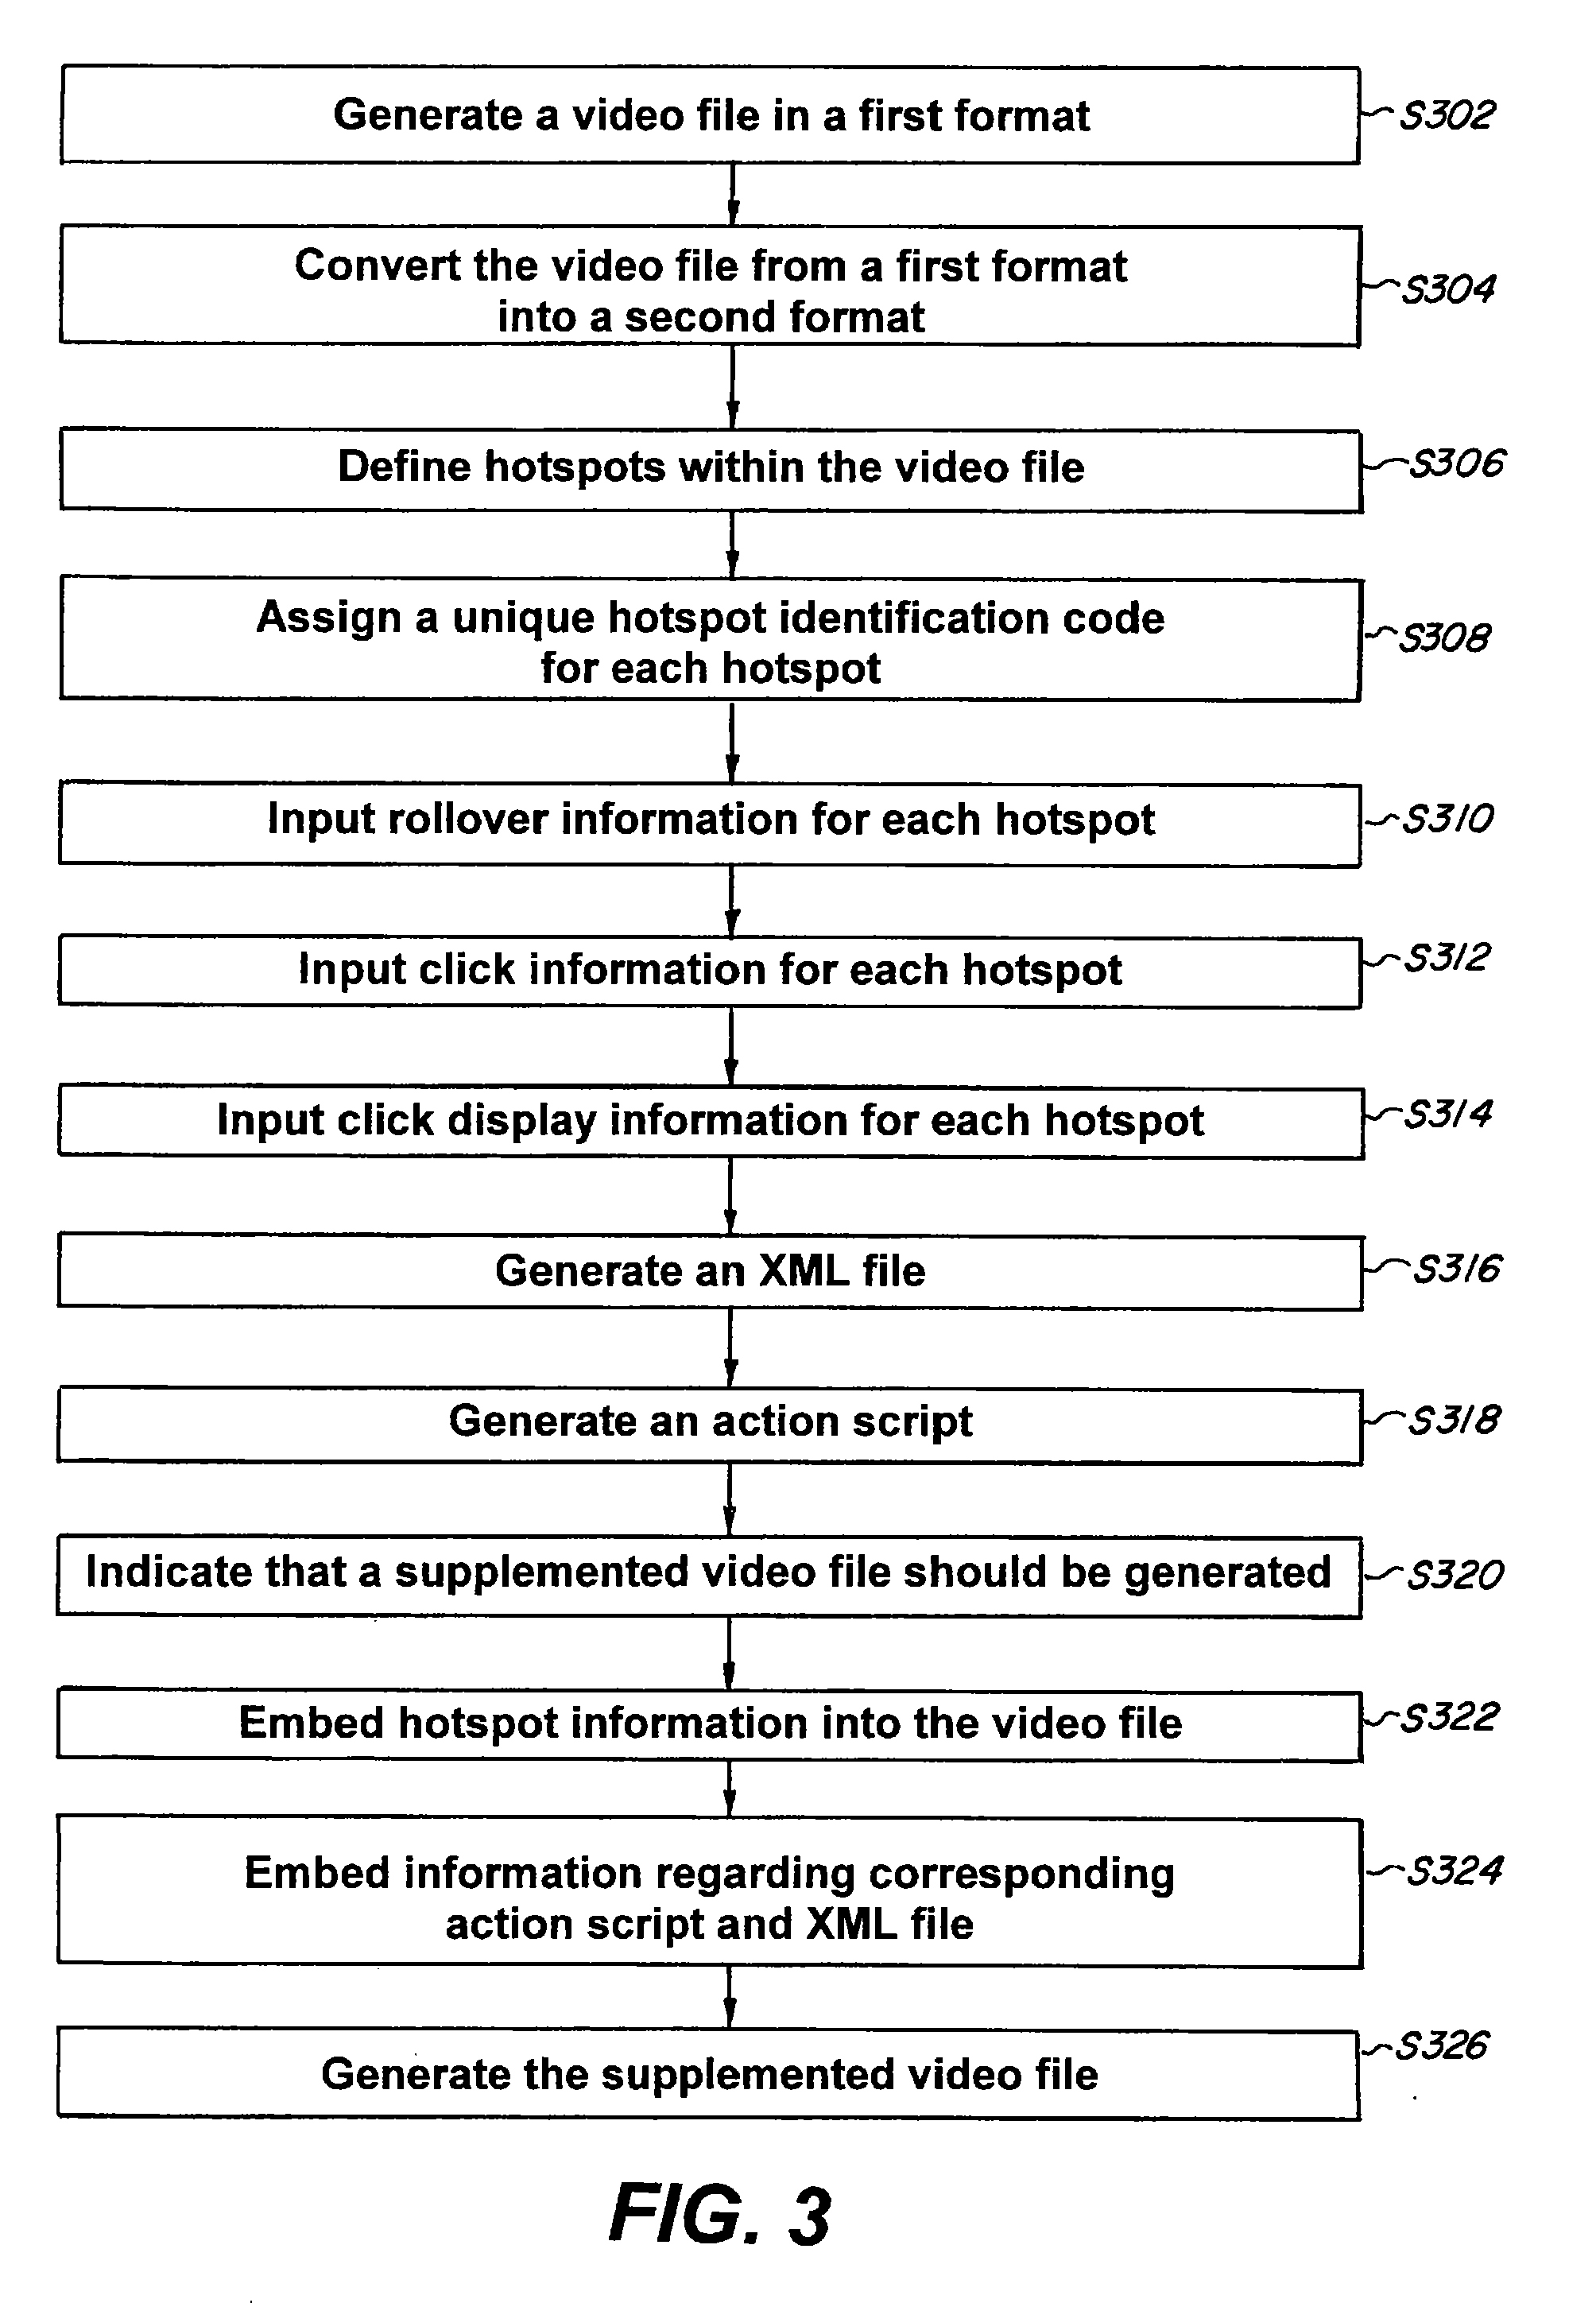 Method and system for generation and playback of supplemented videos